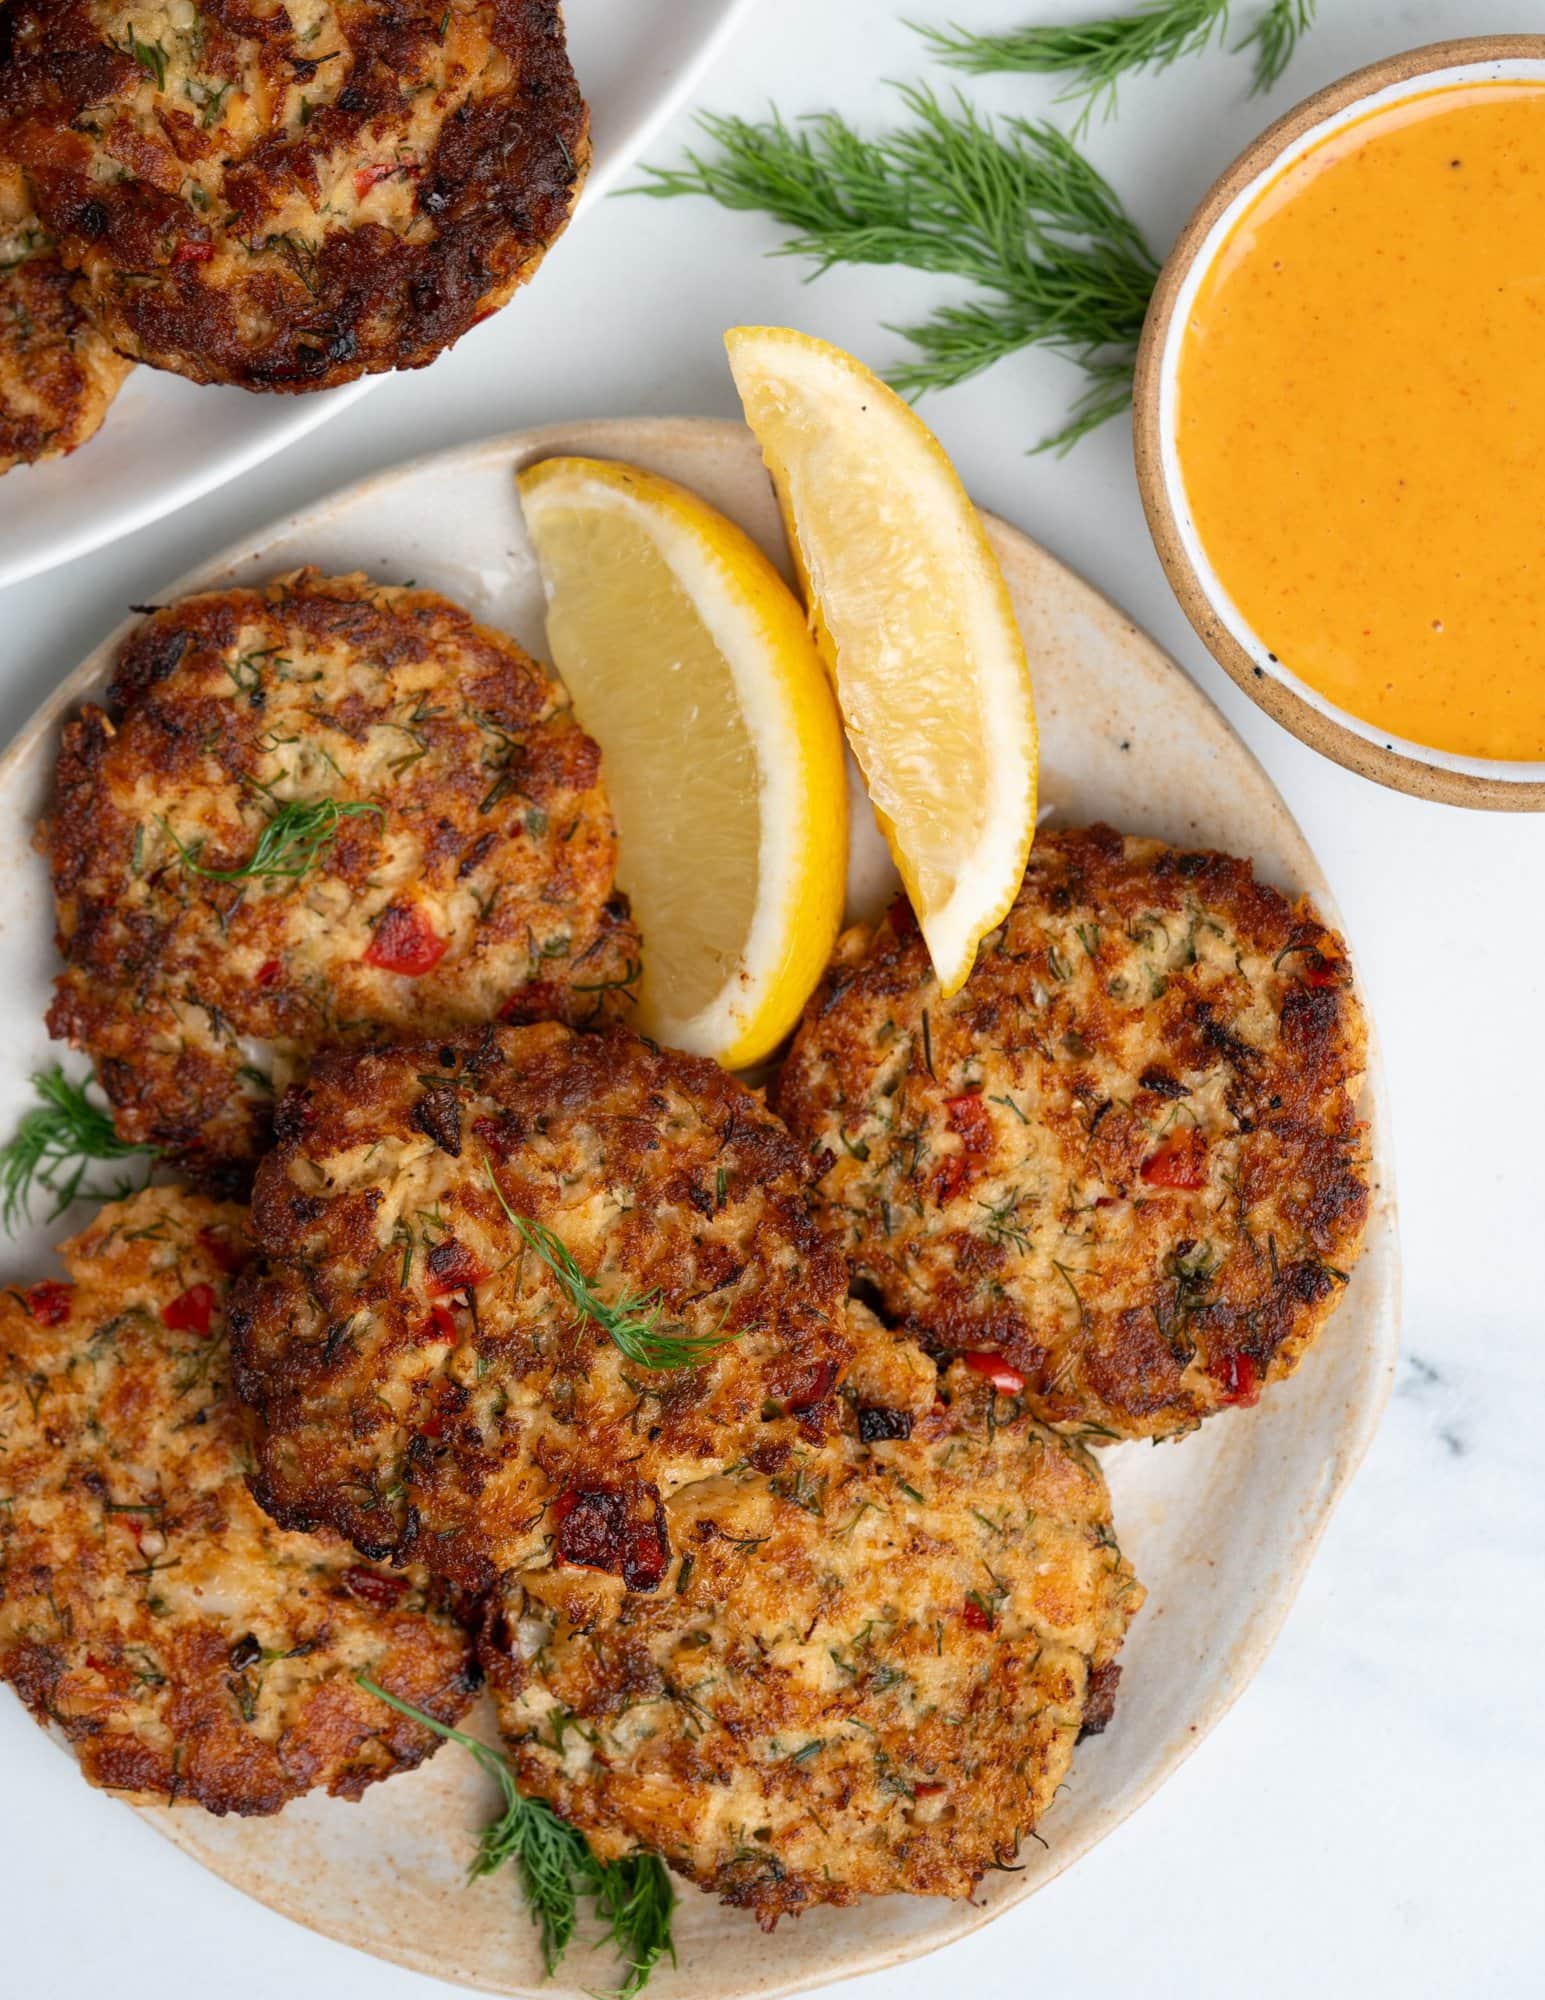 Best Salmon Patties - The flavours of kitchen